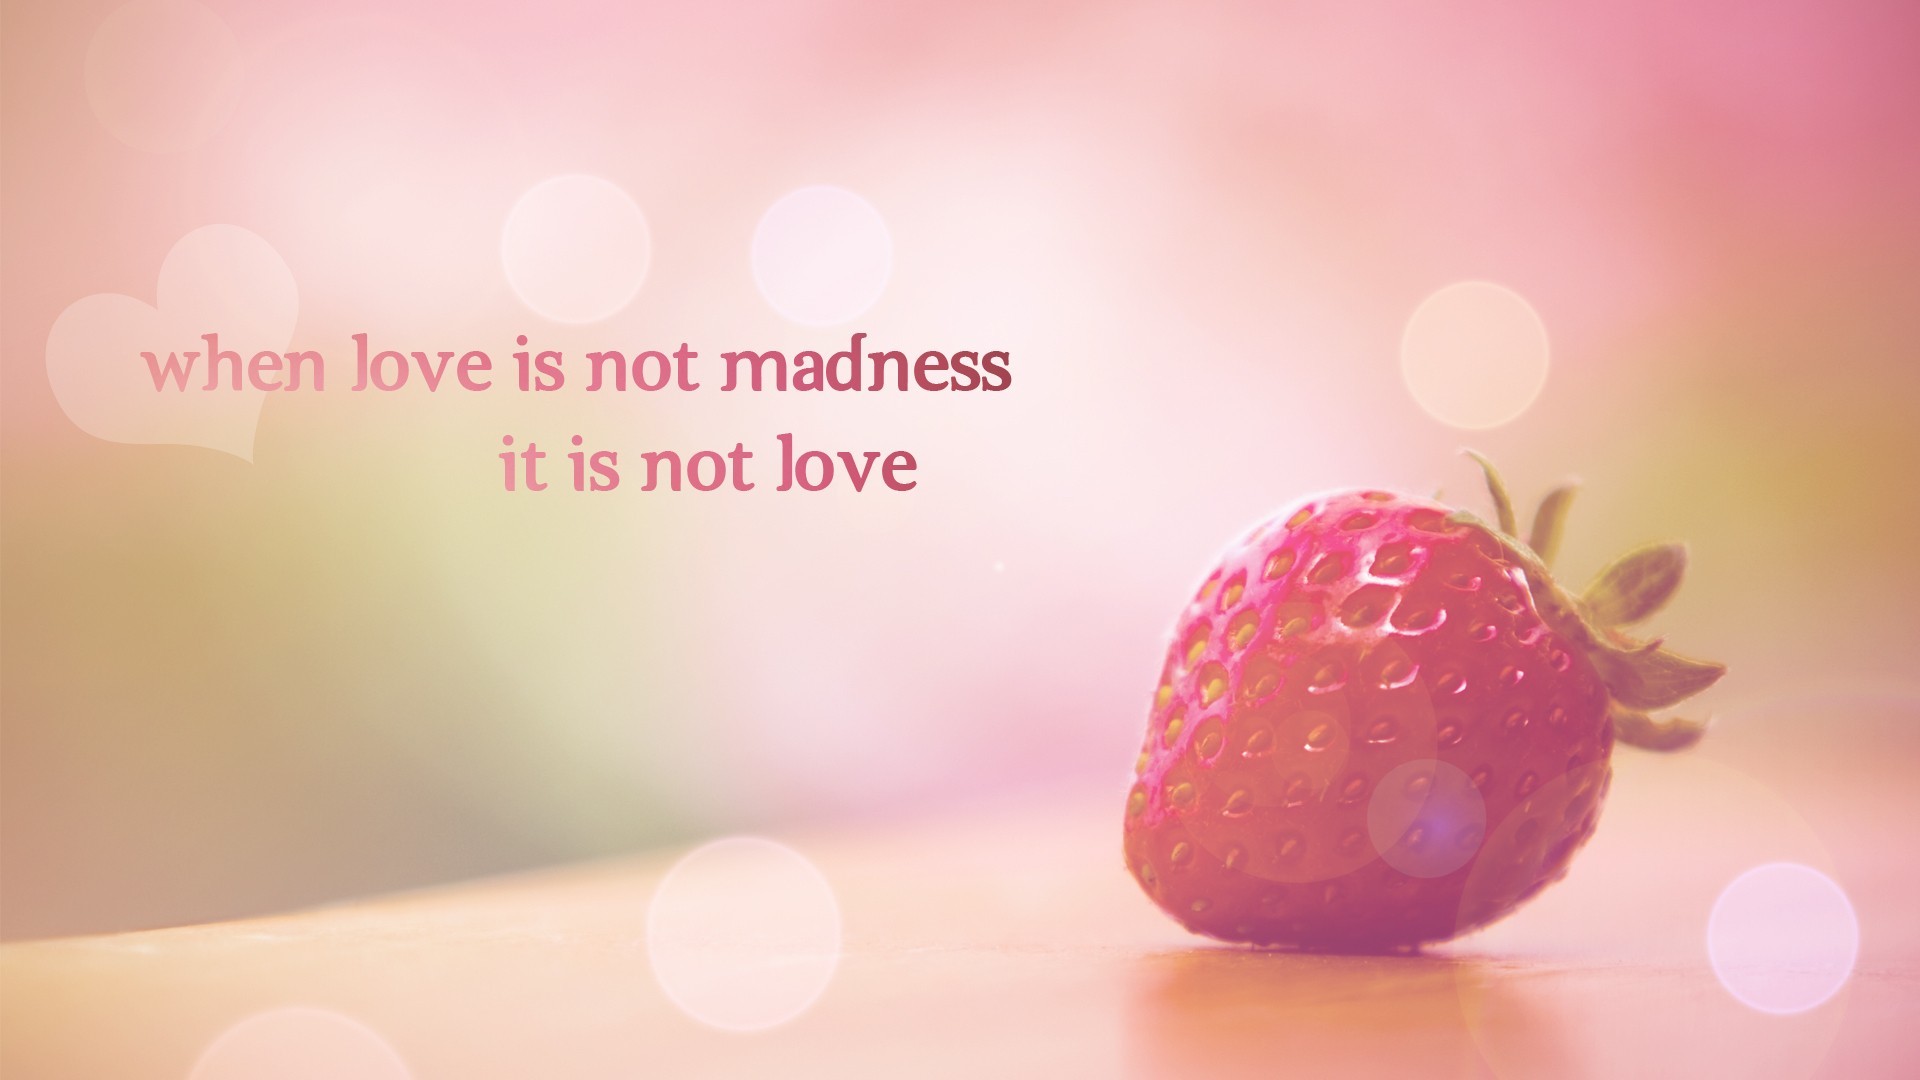 1920x1080 Wallpaper Of Quotes On Love Wallpapers Quotes For Iphone Tumblr Life1 .